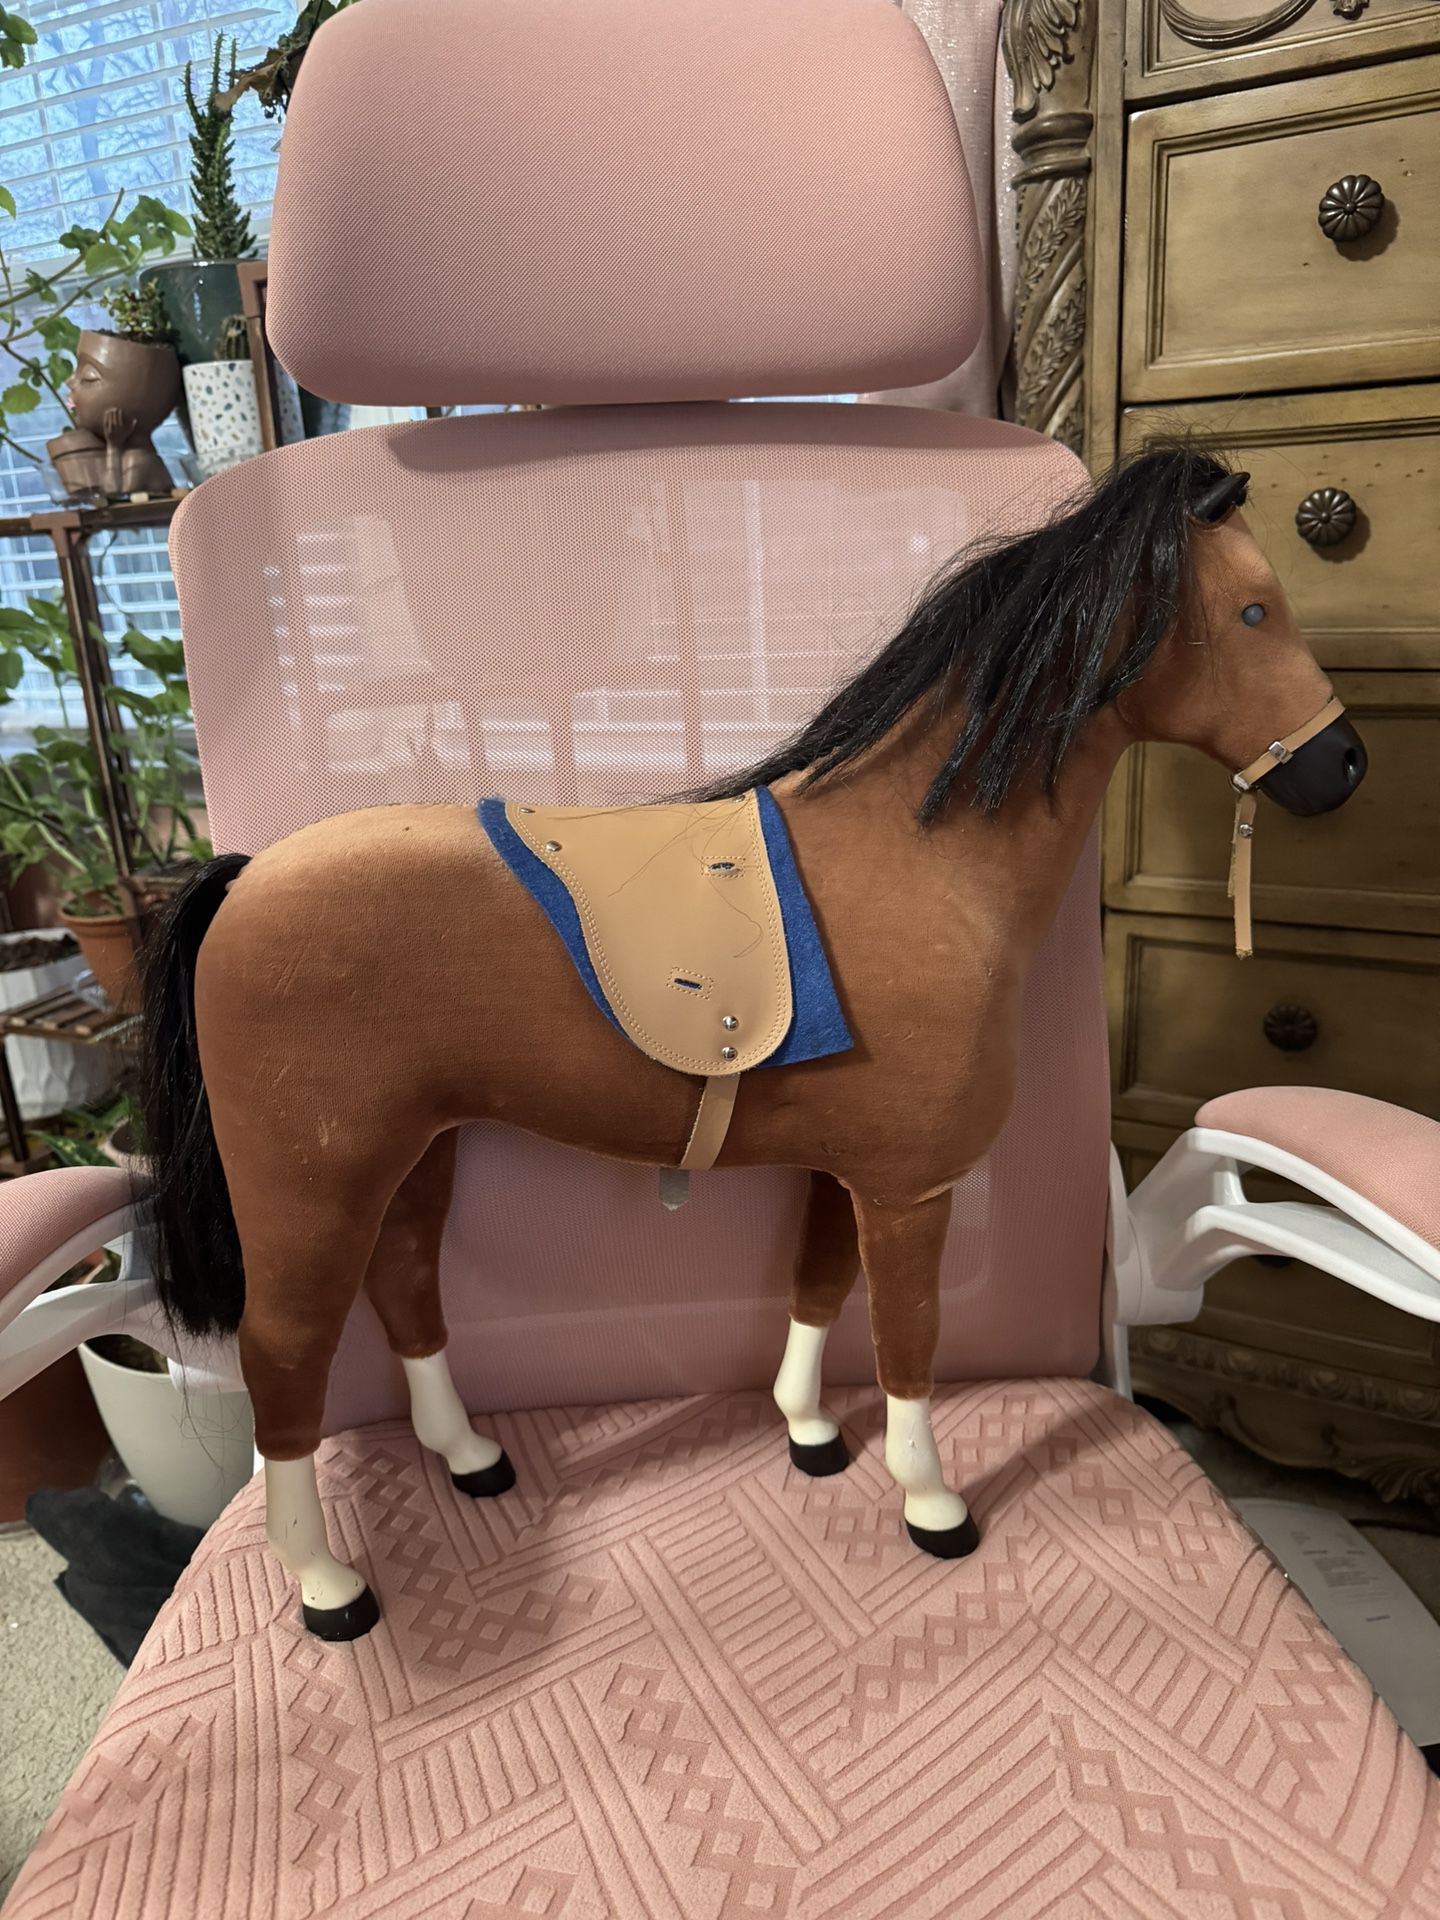 American Girl Horse ( Penny ) For 18” Doll